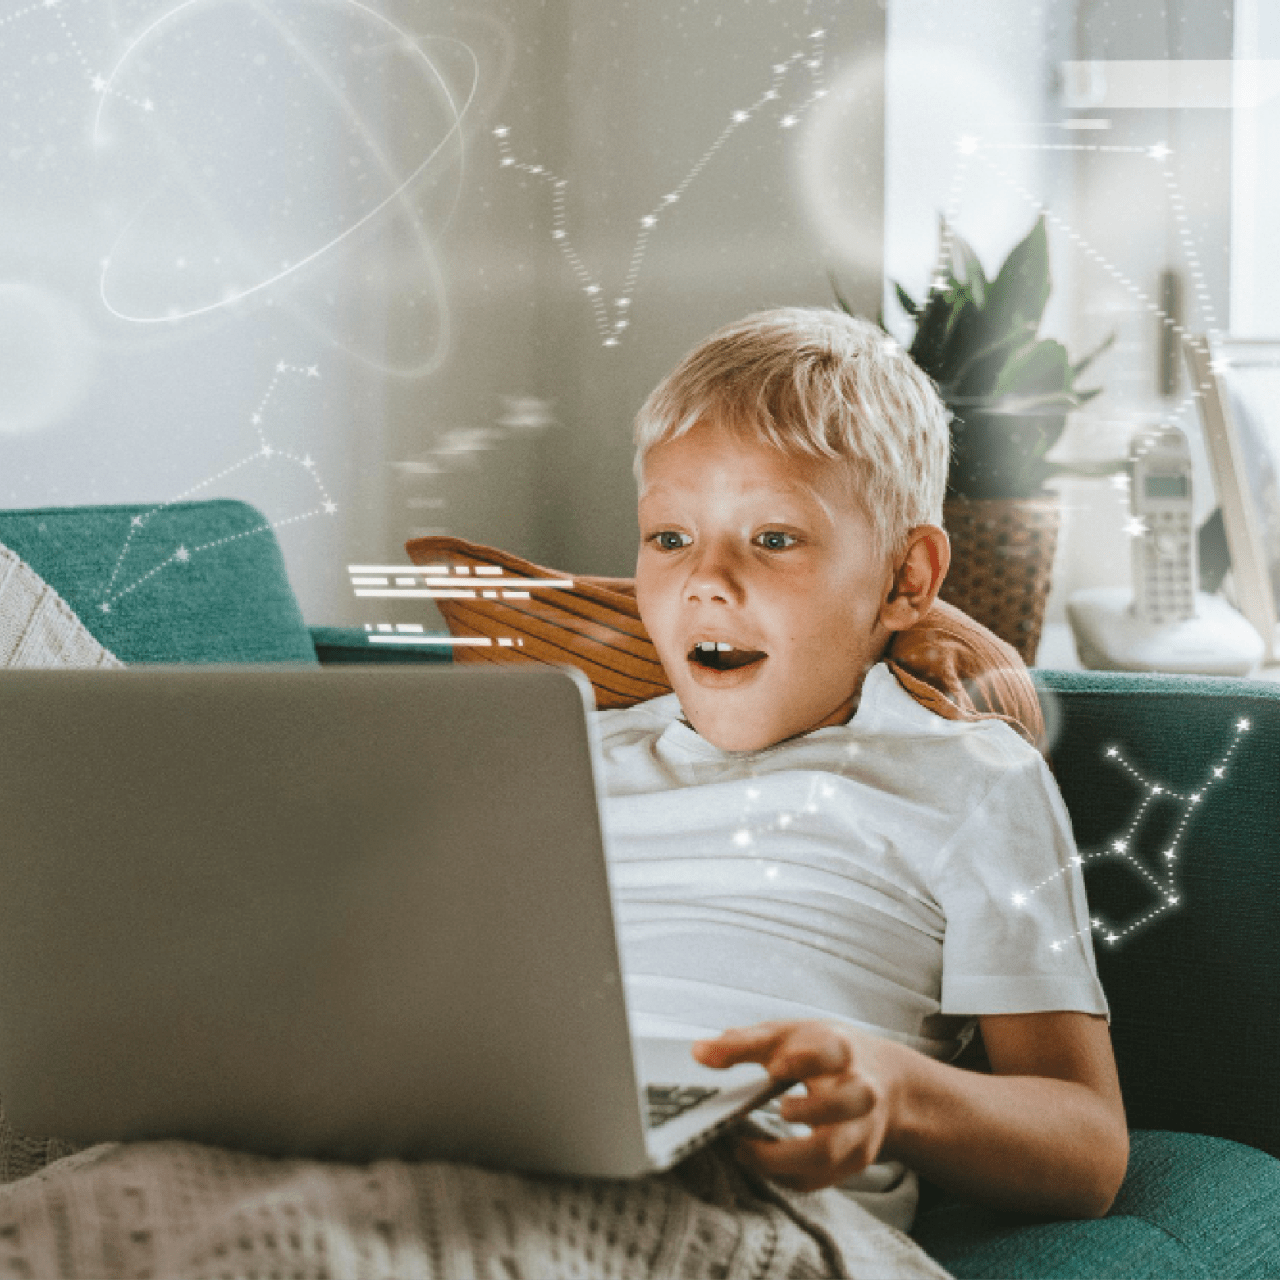 What should you pay attention to when buying a tablet, laptop or desktop computer for your child?